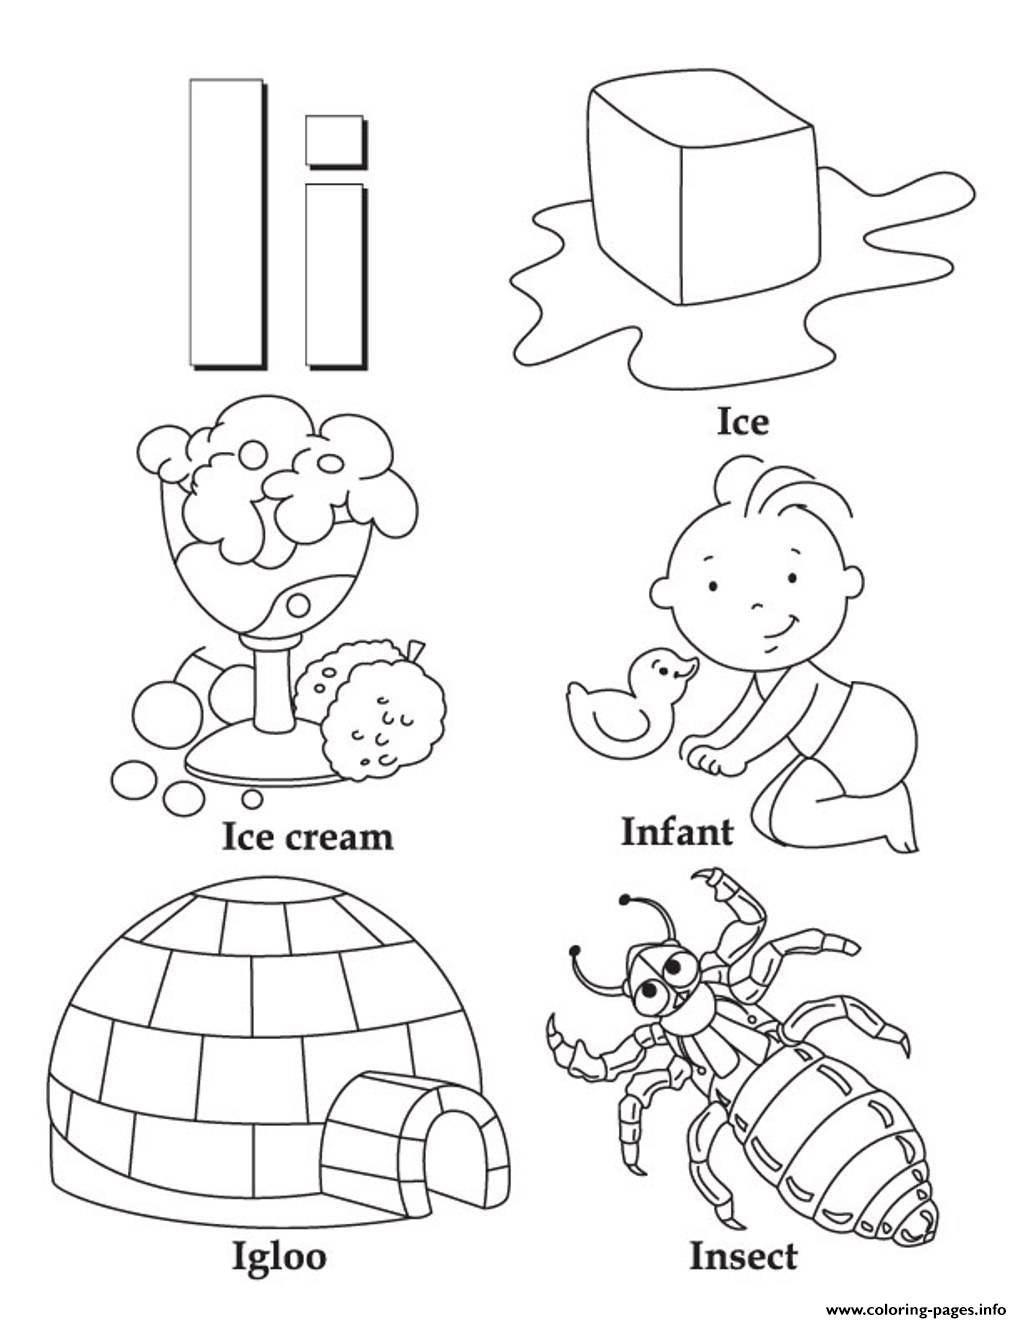 Download I Words Alphabet Color Pages6e14 Coloring Pages Printable